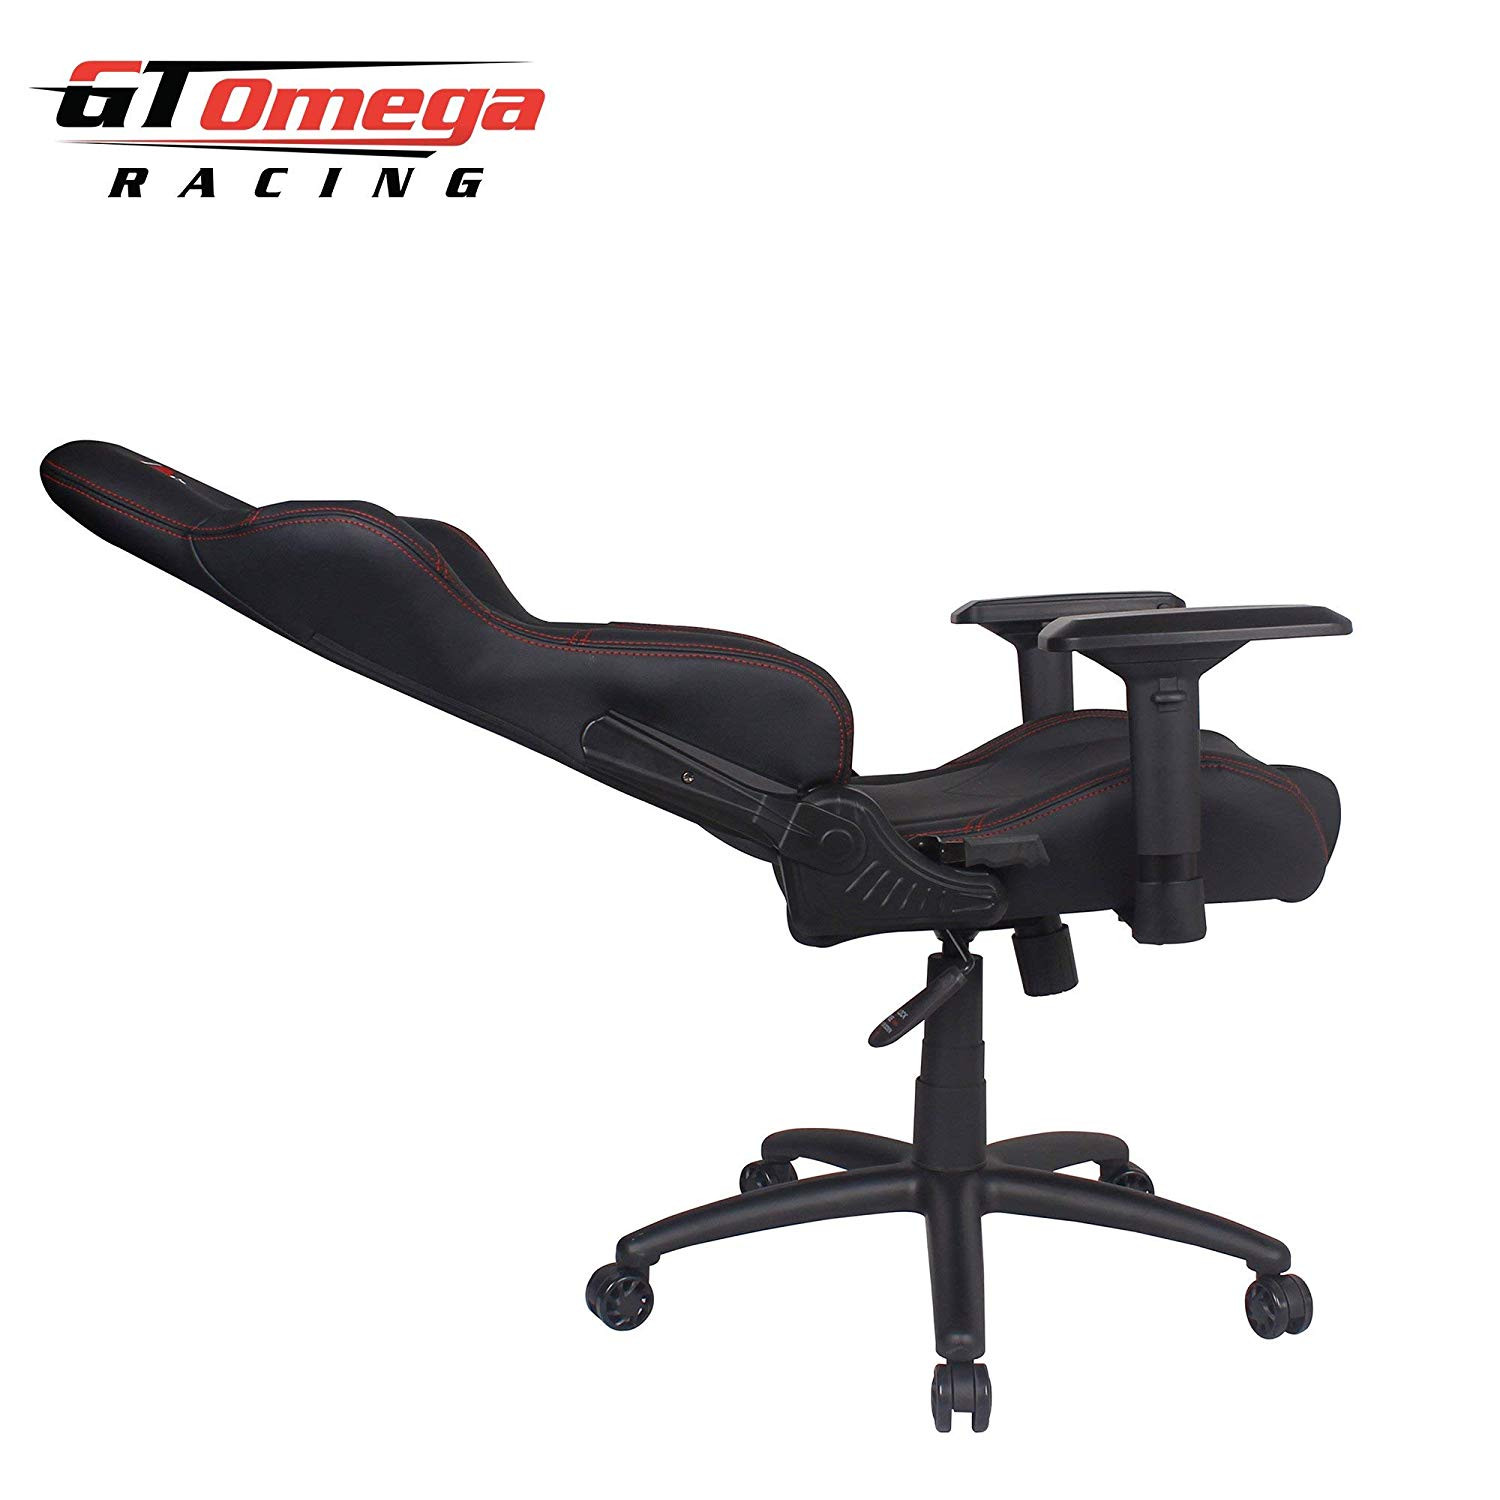 Gt Omega Gt Omega Pro Racing Office Chair Black Next Leather 120kg  1889 Stone Maximum Weight  